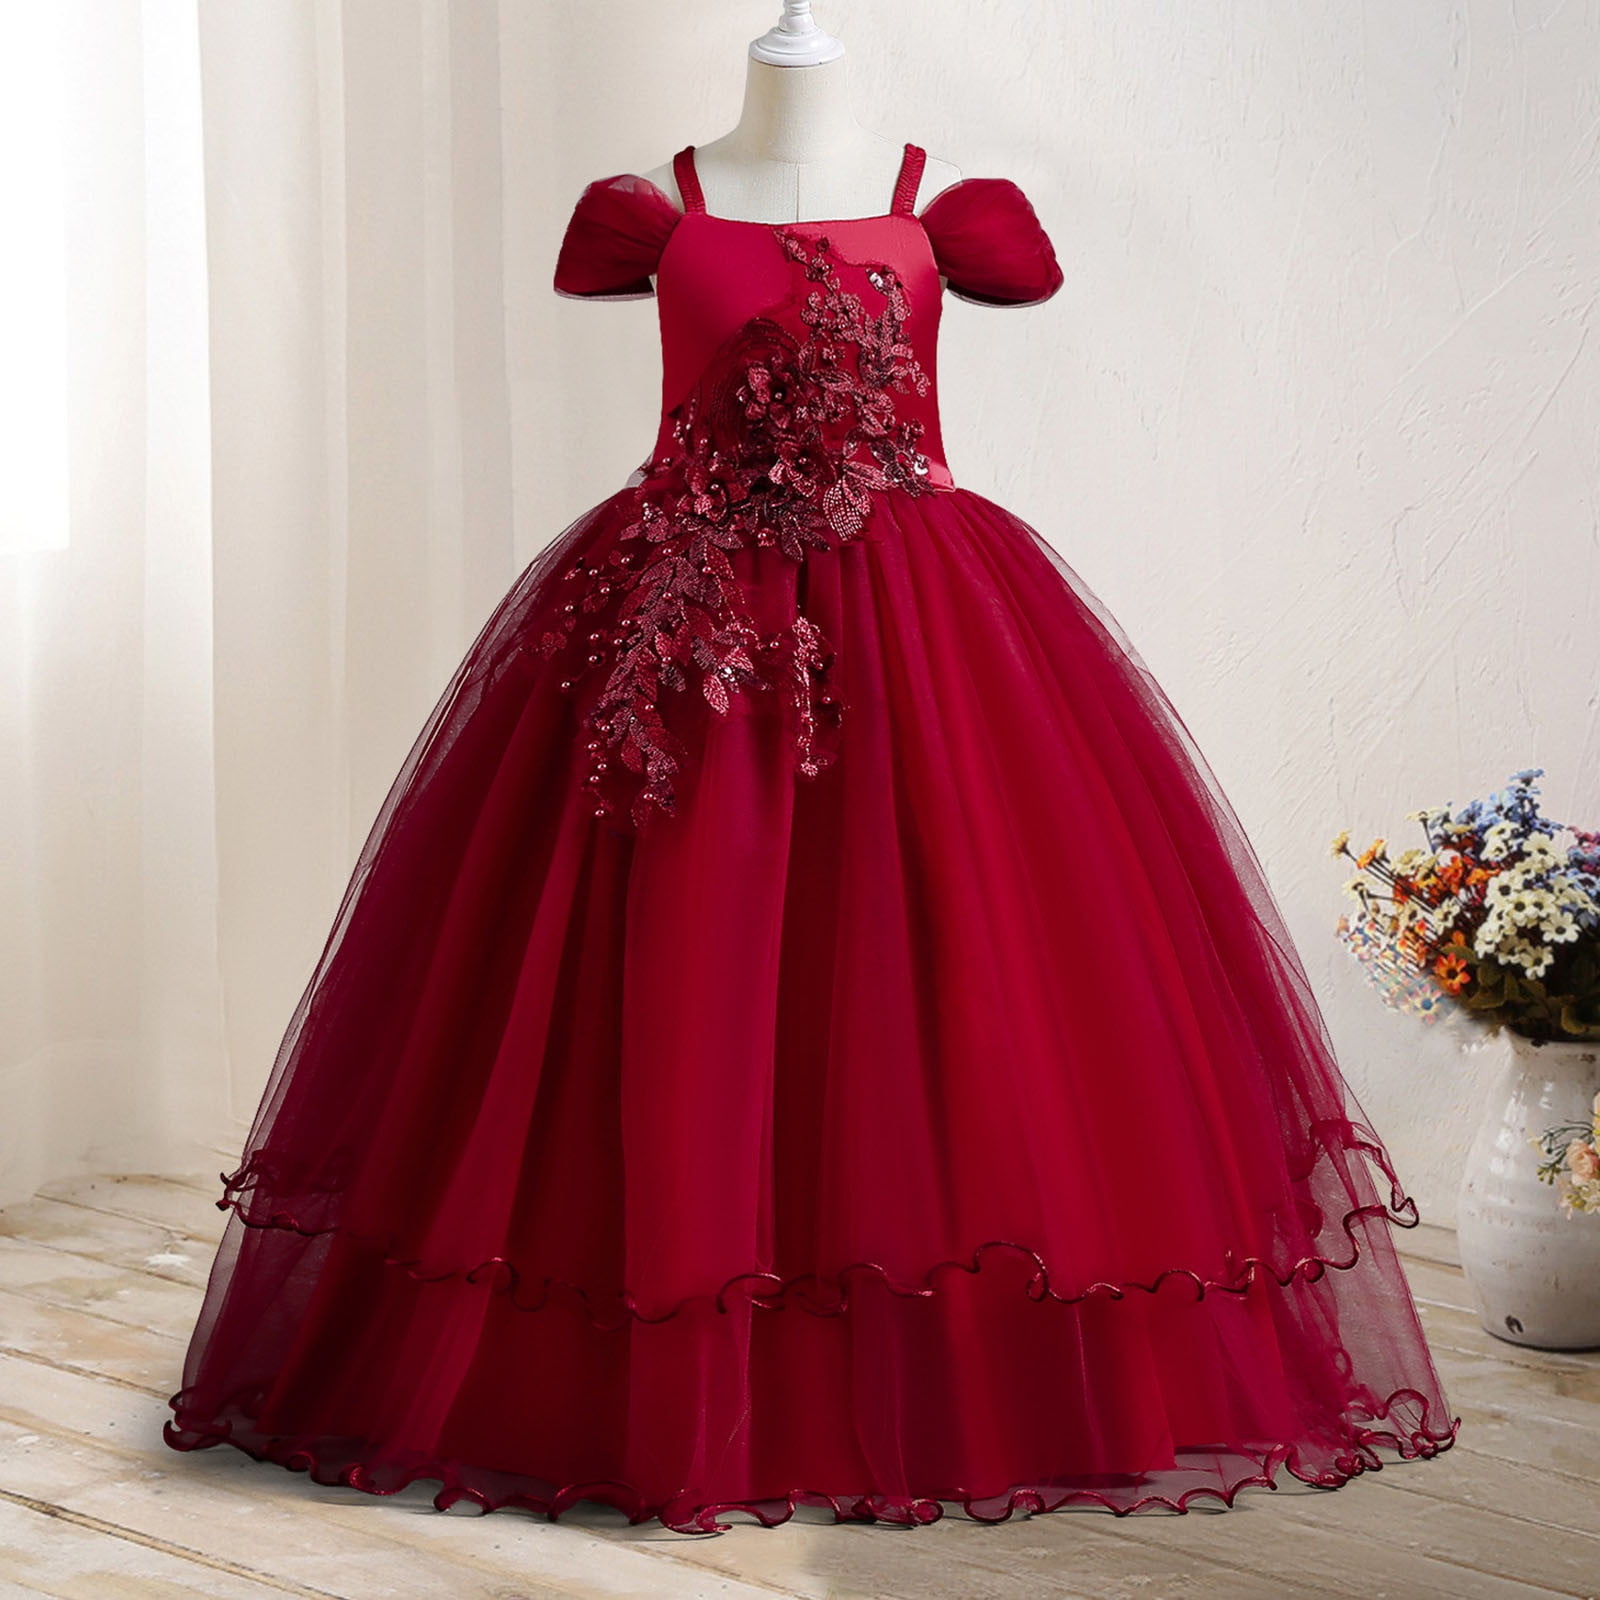 RED GOWN FOR 7TH BIRTHDAY, Babies & Kids, Babies & Kids Fashion on Carousell-mncb.edu.vn